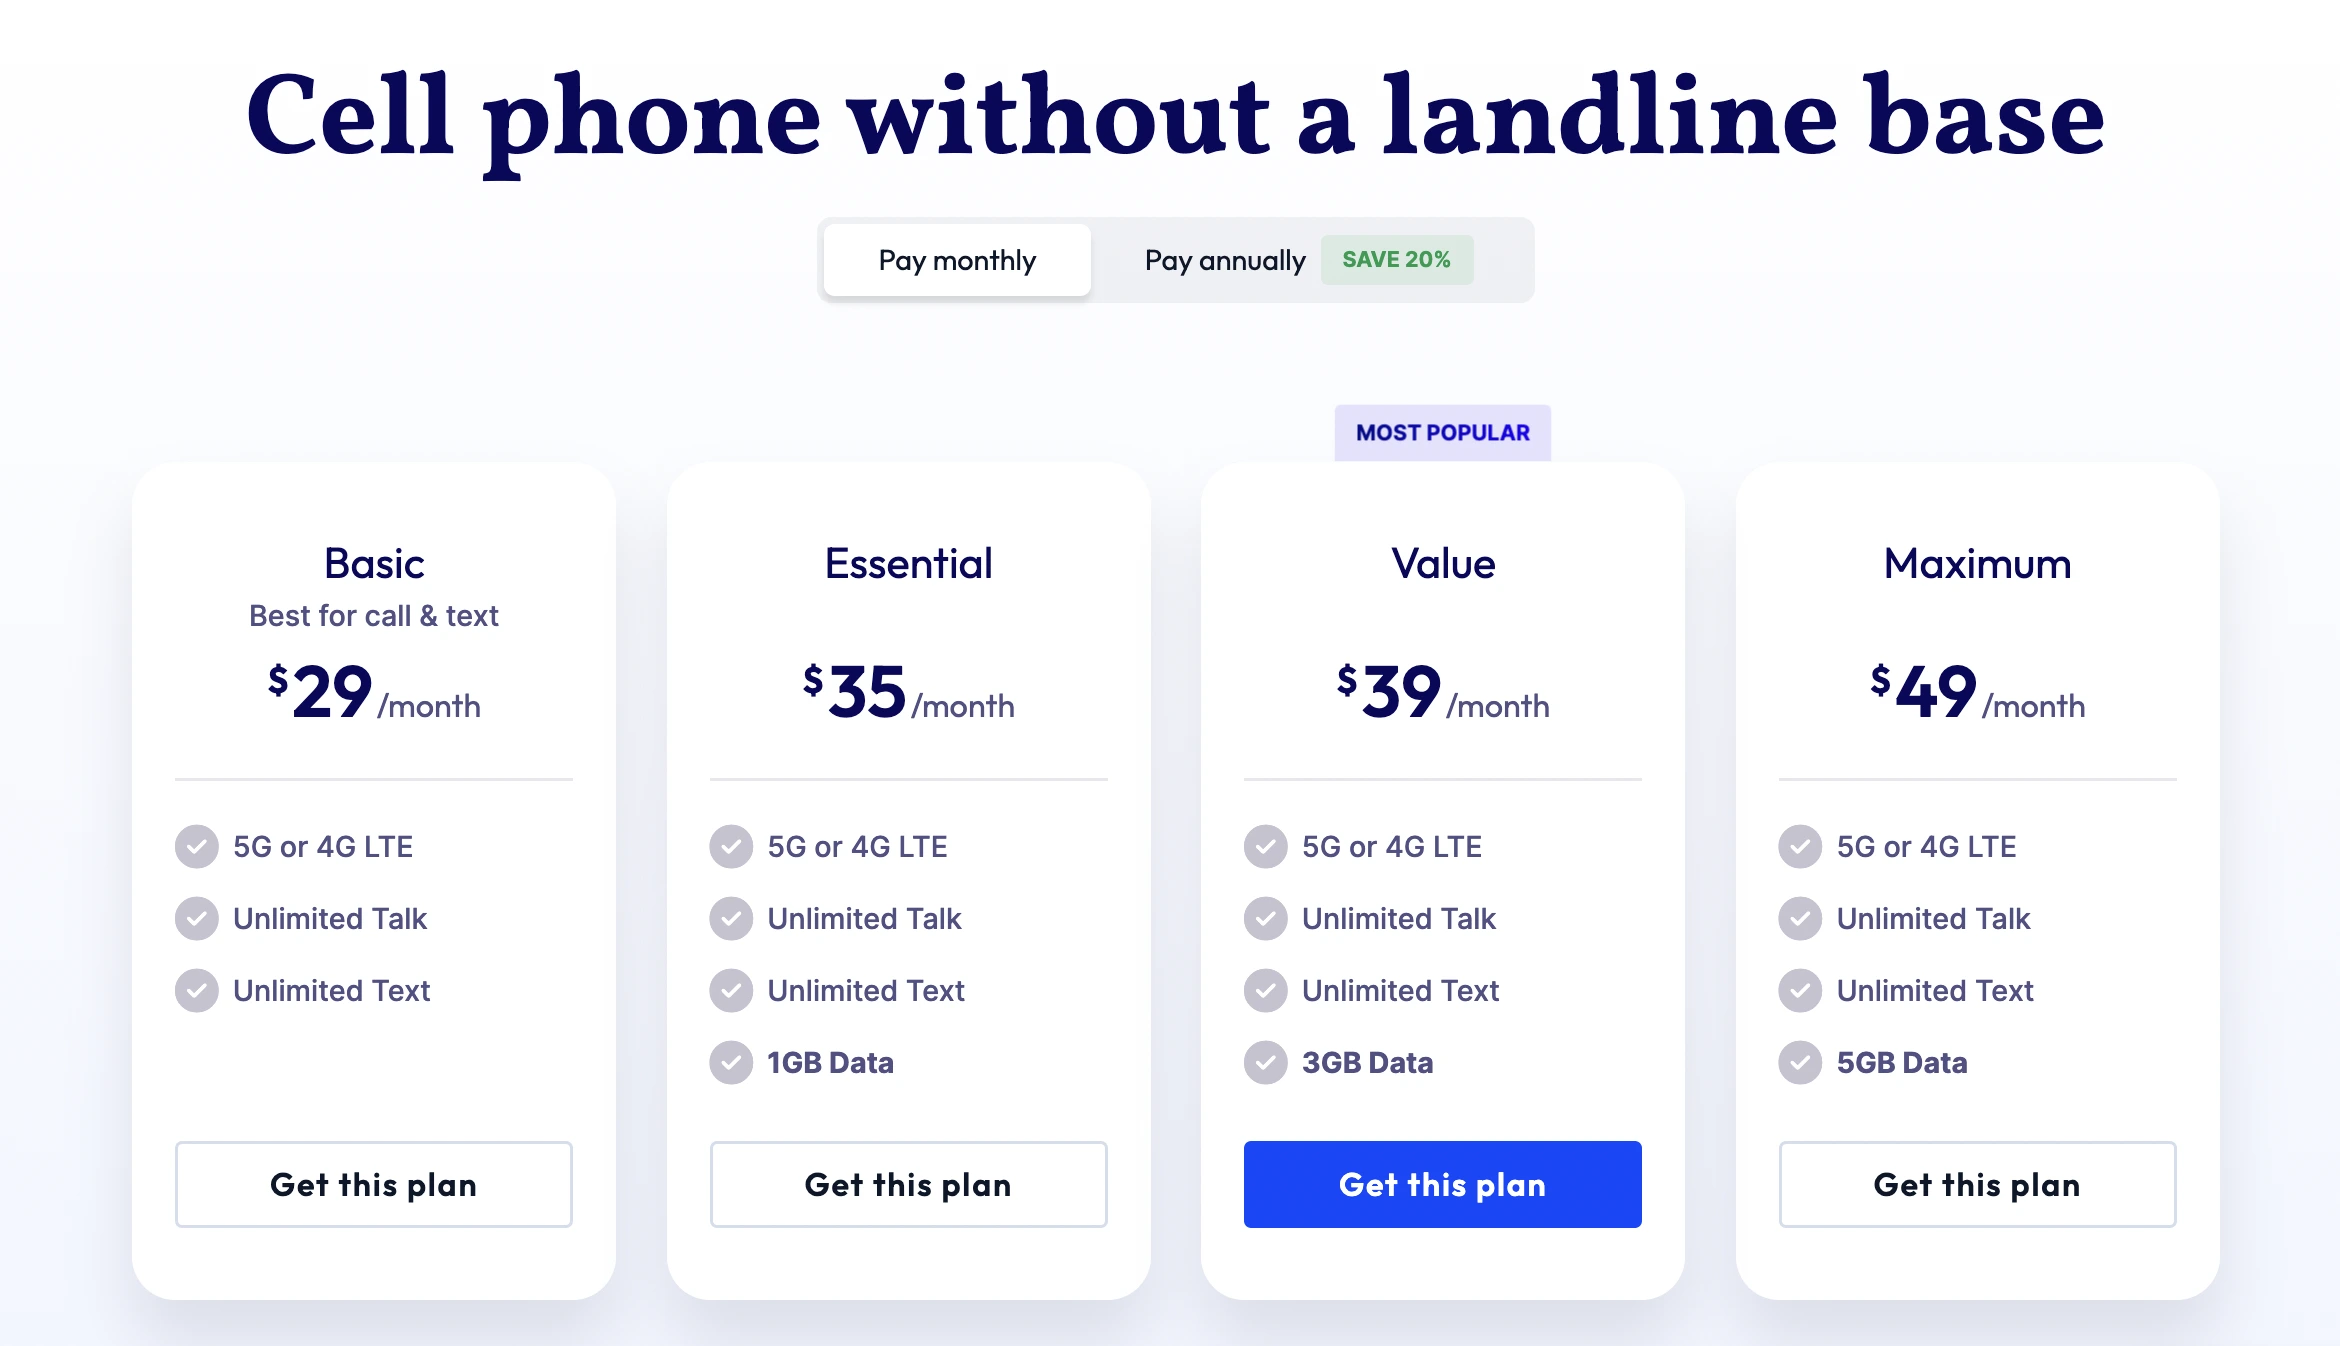 Community Phone's Cell Phone Pricing